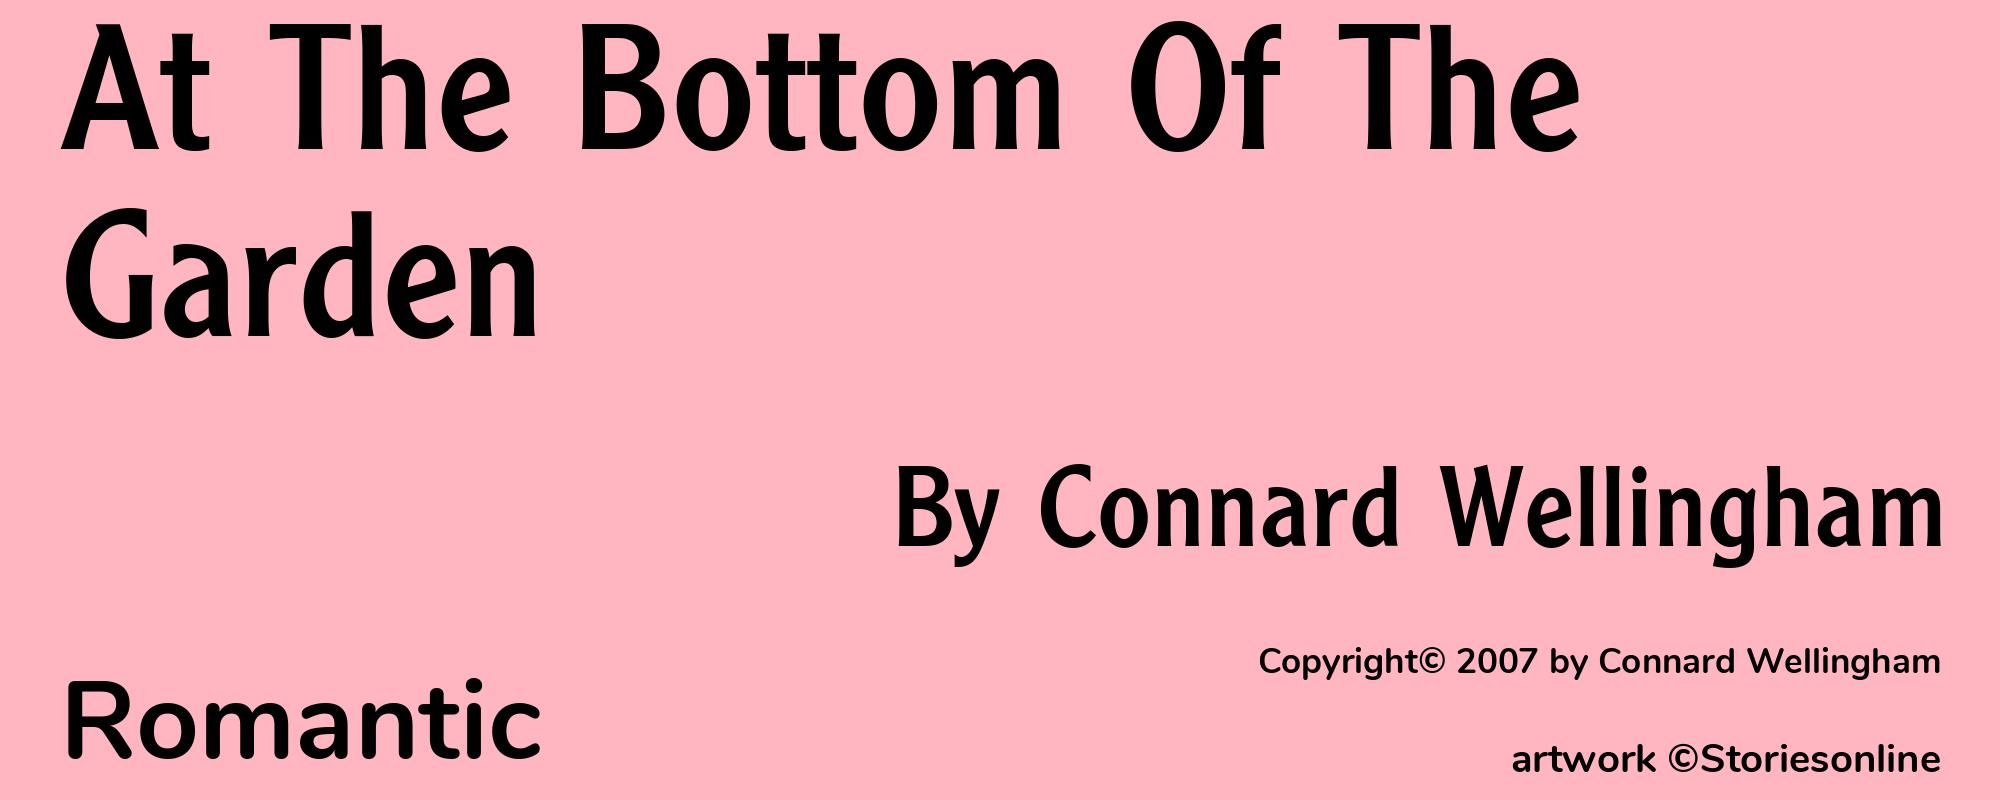 At The Bottom Of The Garden - Cover